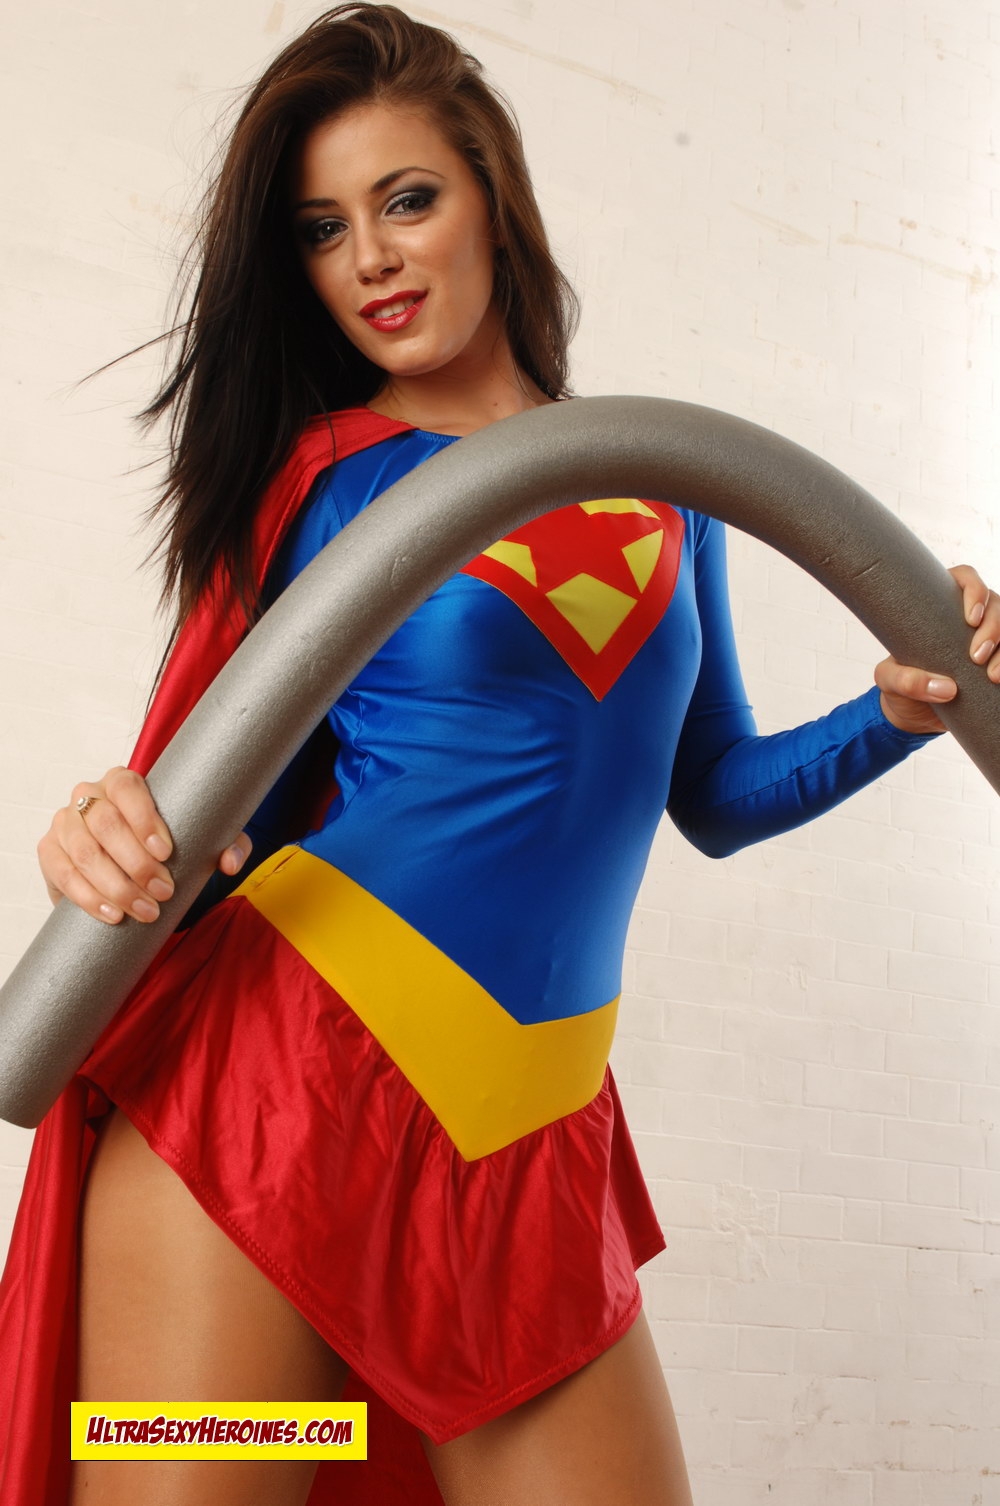 [UltraSexyHeroines] Super Heroine Cosplay Nude - Holly 77